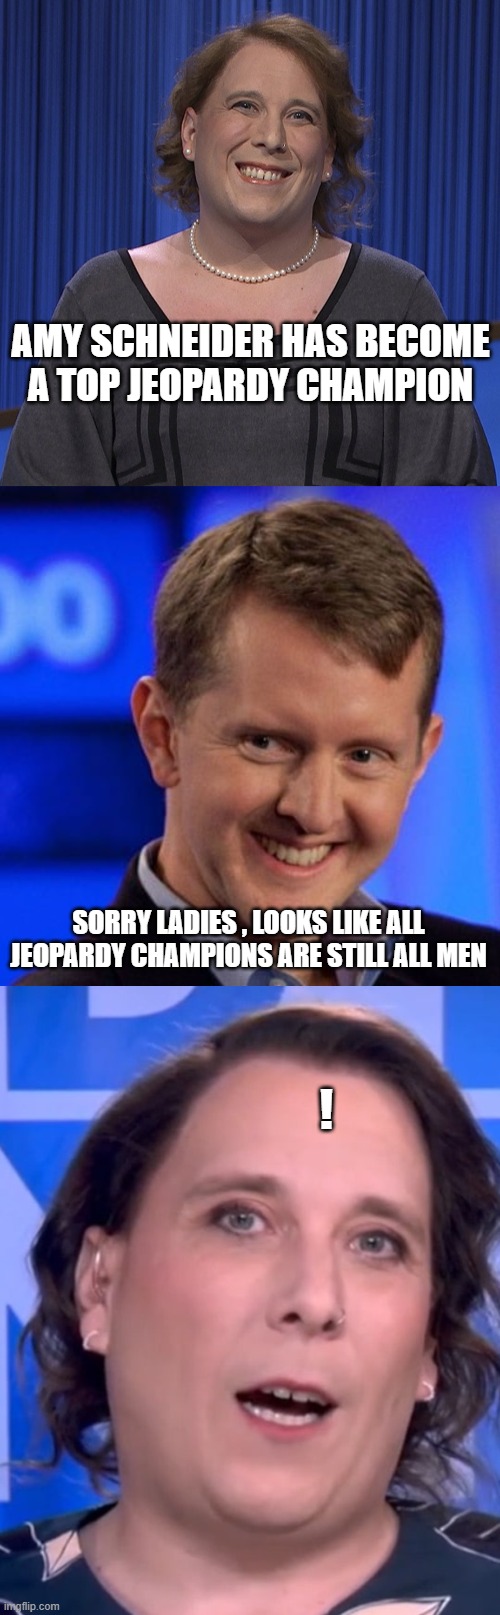 Looks like you'll have to wait your turn ladies  - LoL | AMY SCHNEIDER HAS BECOME A TOP JEOPARDY CHAMPION; SORRY LADIES , LOOKS LIKE ALL JEOPARDY CHAMPIONS ARE STILL ALL MEN; ! | image tagged in men vs women,stupid liberals,political meme,funny memes,political correctness,politics lol | made w/ Imgflip meme maker